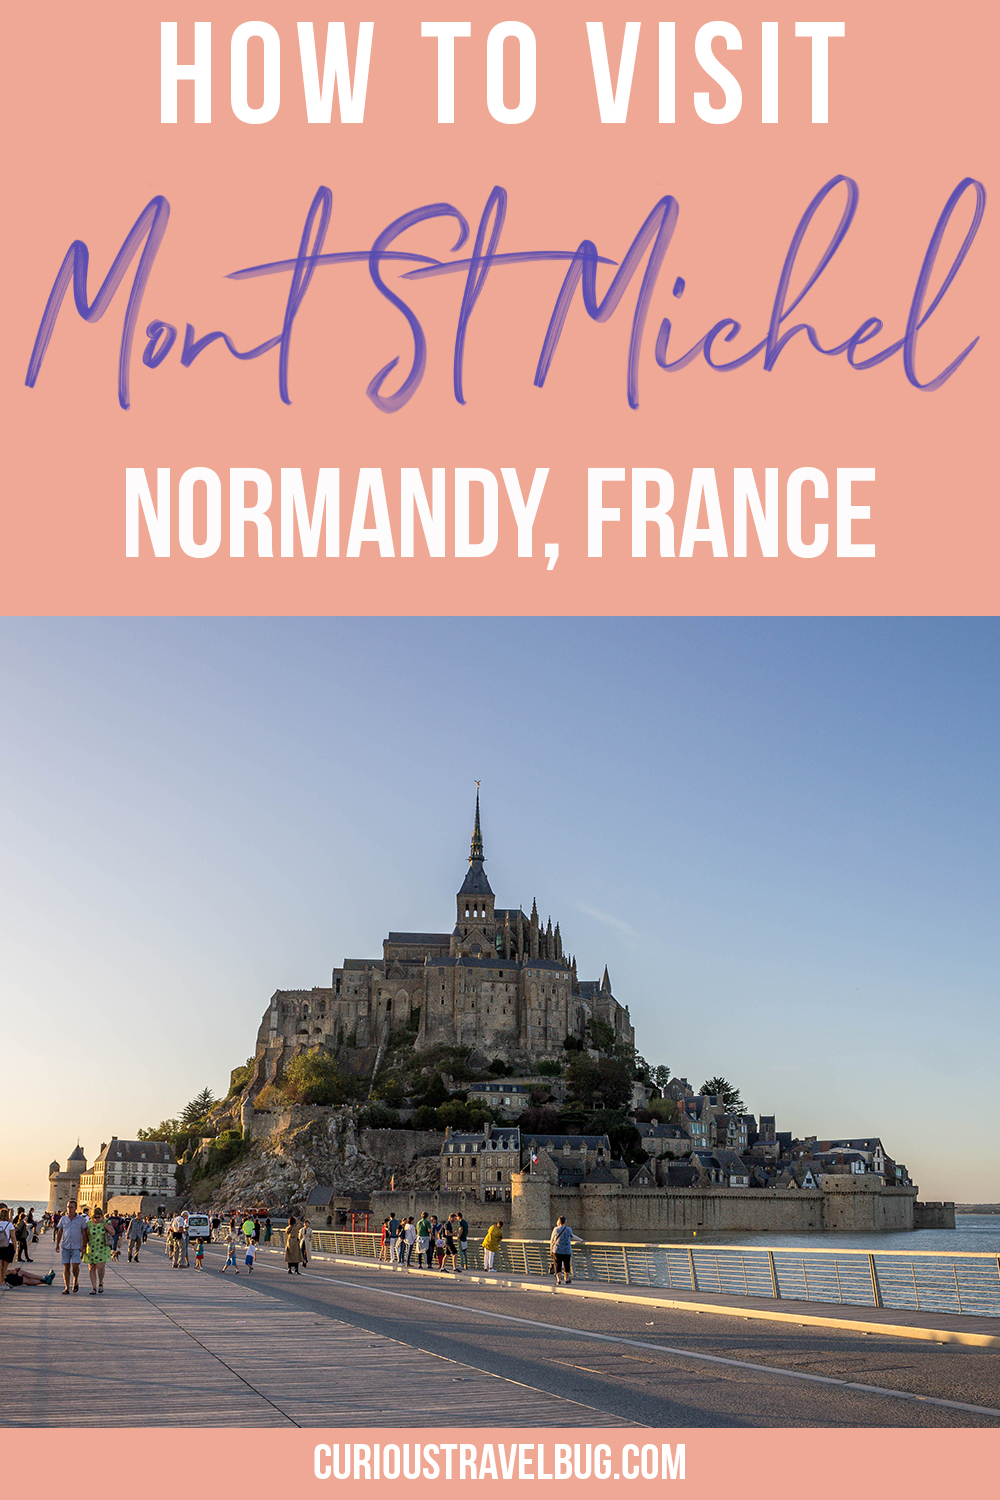 Wondering about whether you should visit Mont Saint Michel as a day trip from Paris? This full guide to Mont Saint Michel tells you everything you need to know to plan the perfect trip there and how you can include it in your France itinerary.